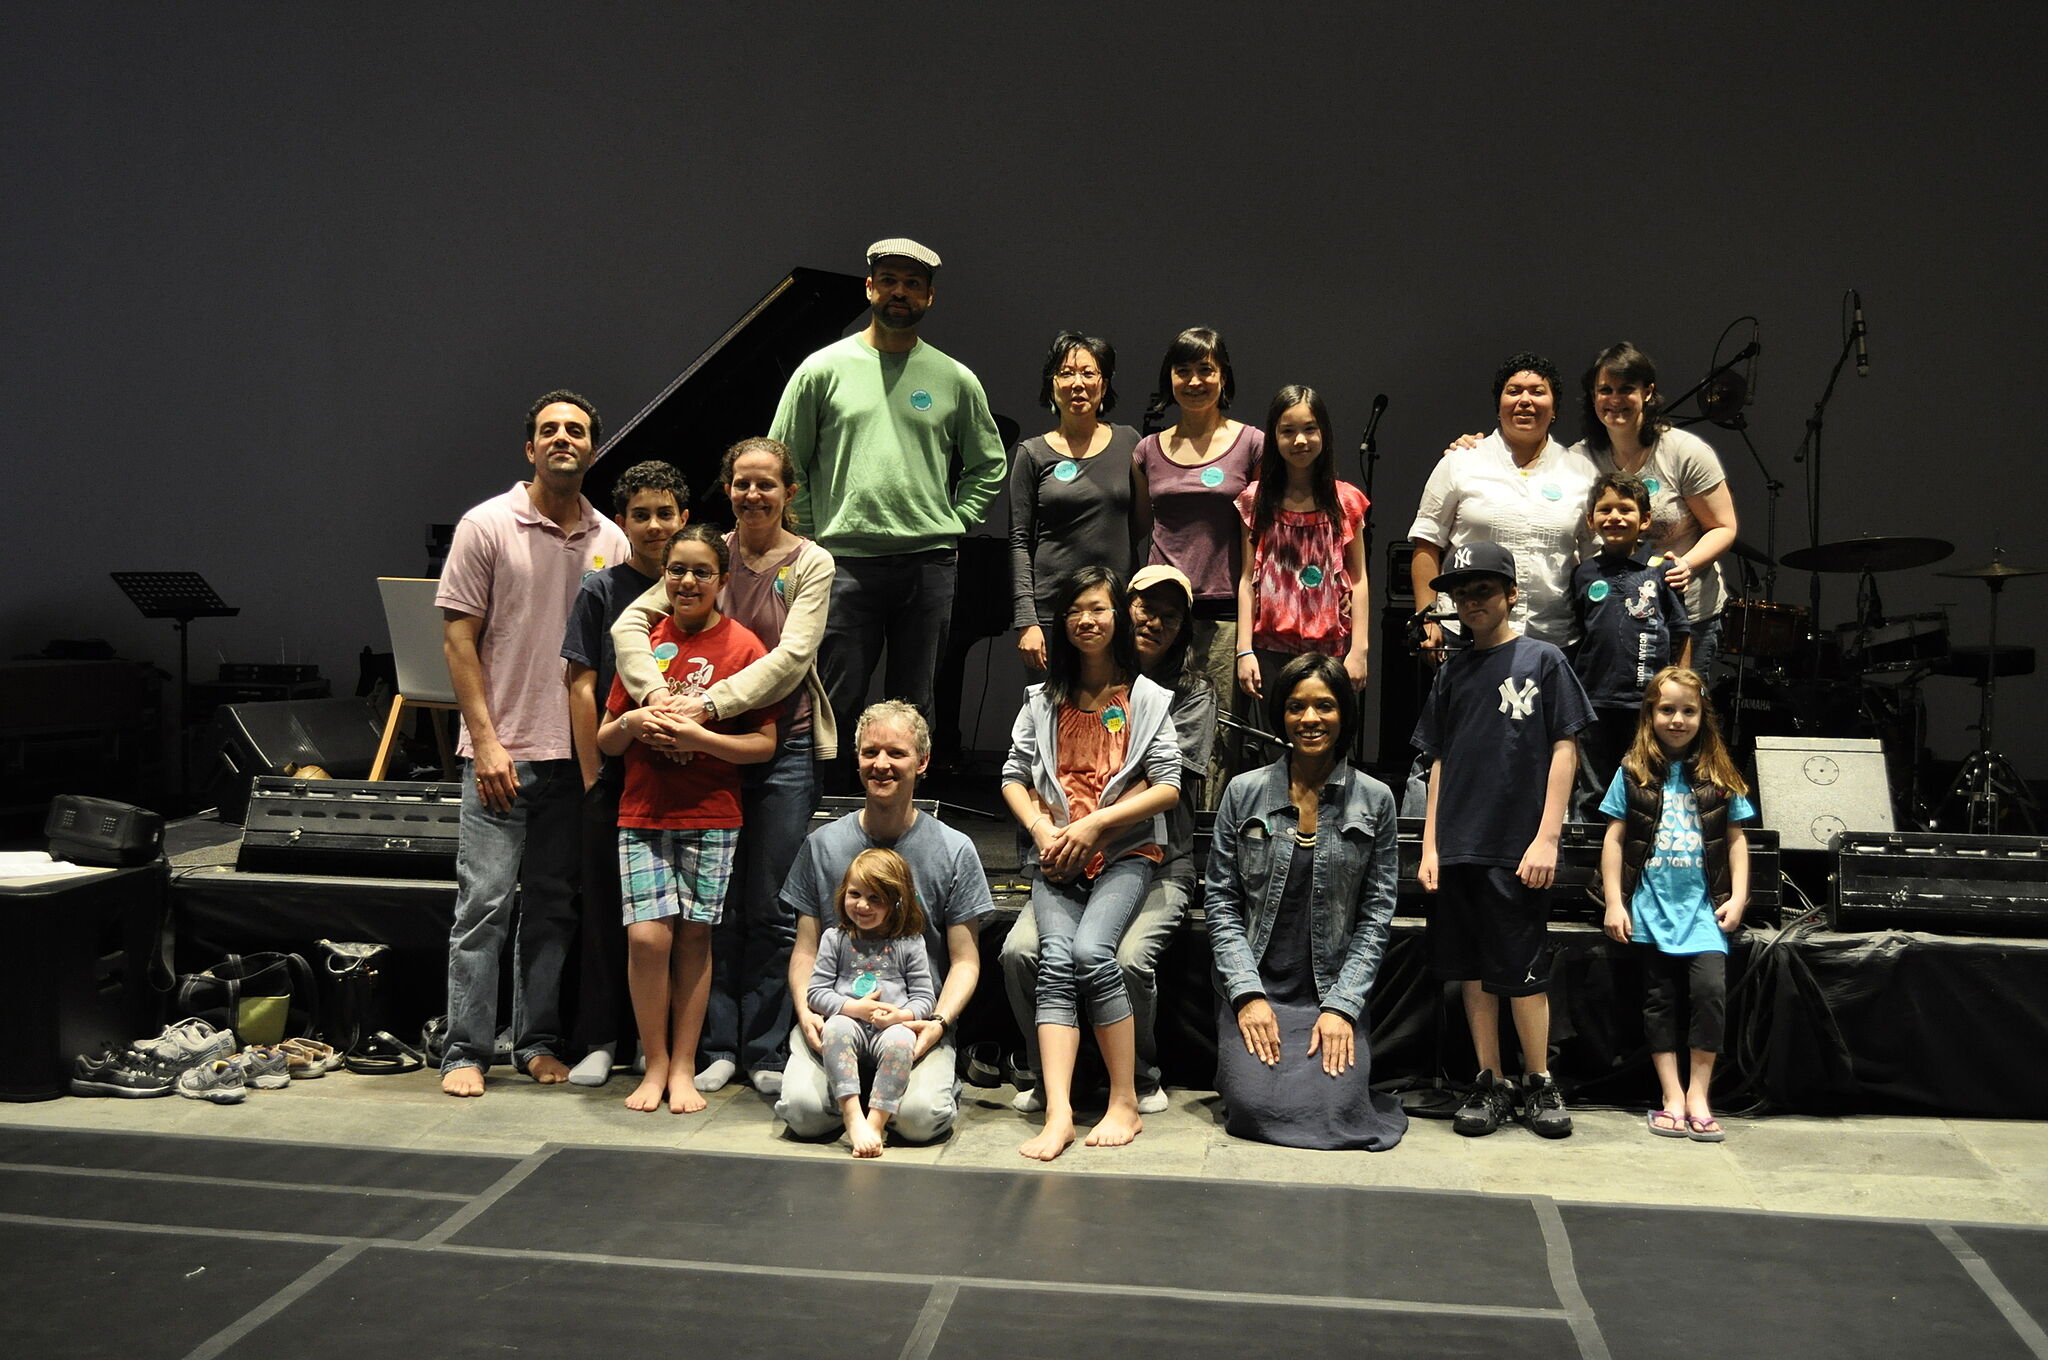 Group photo with artist and families